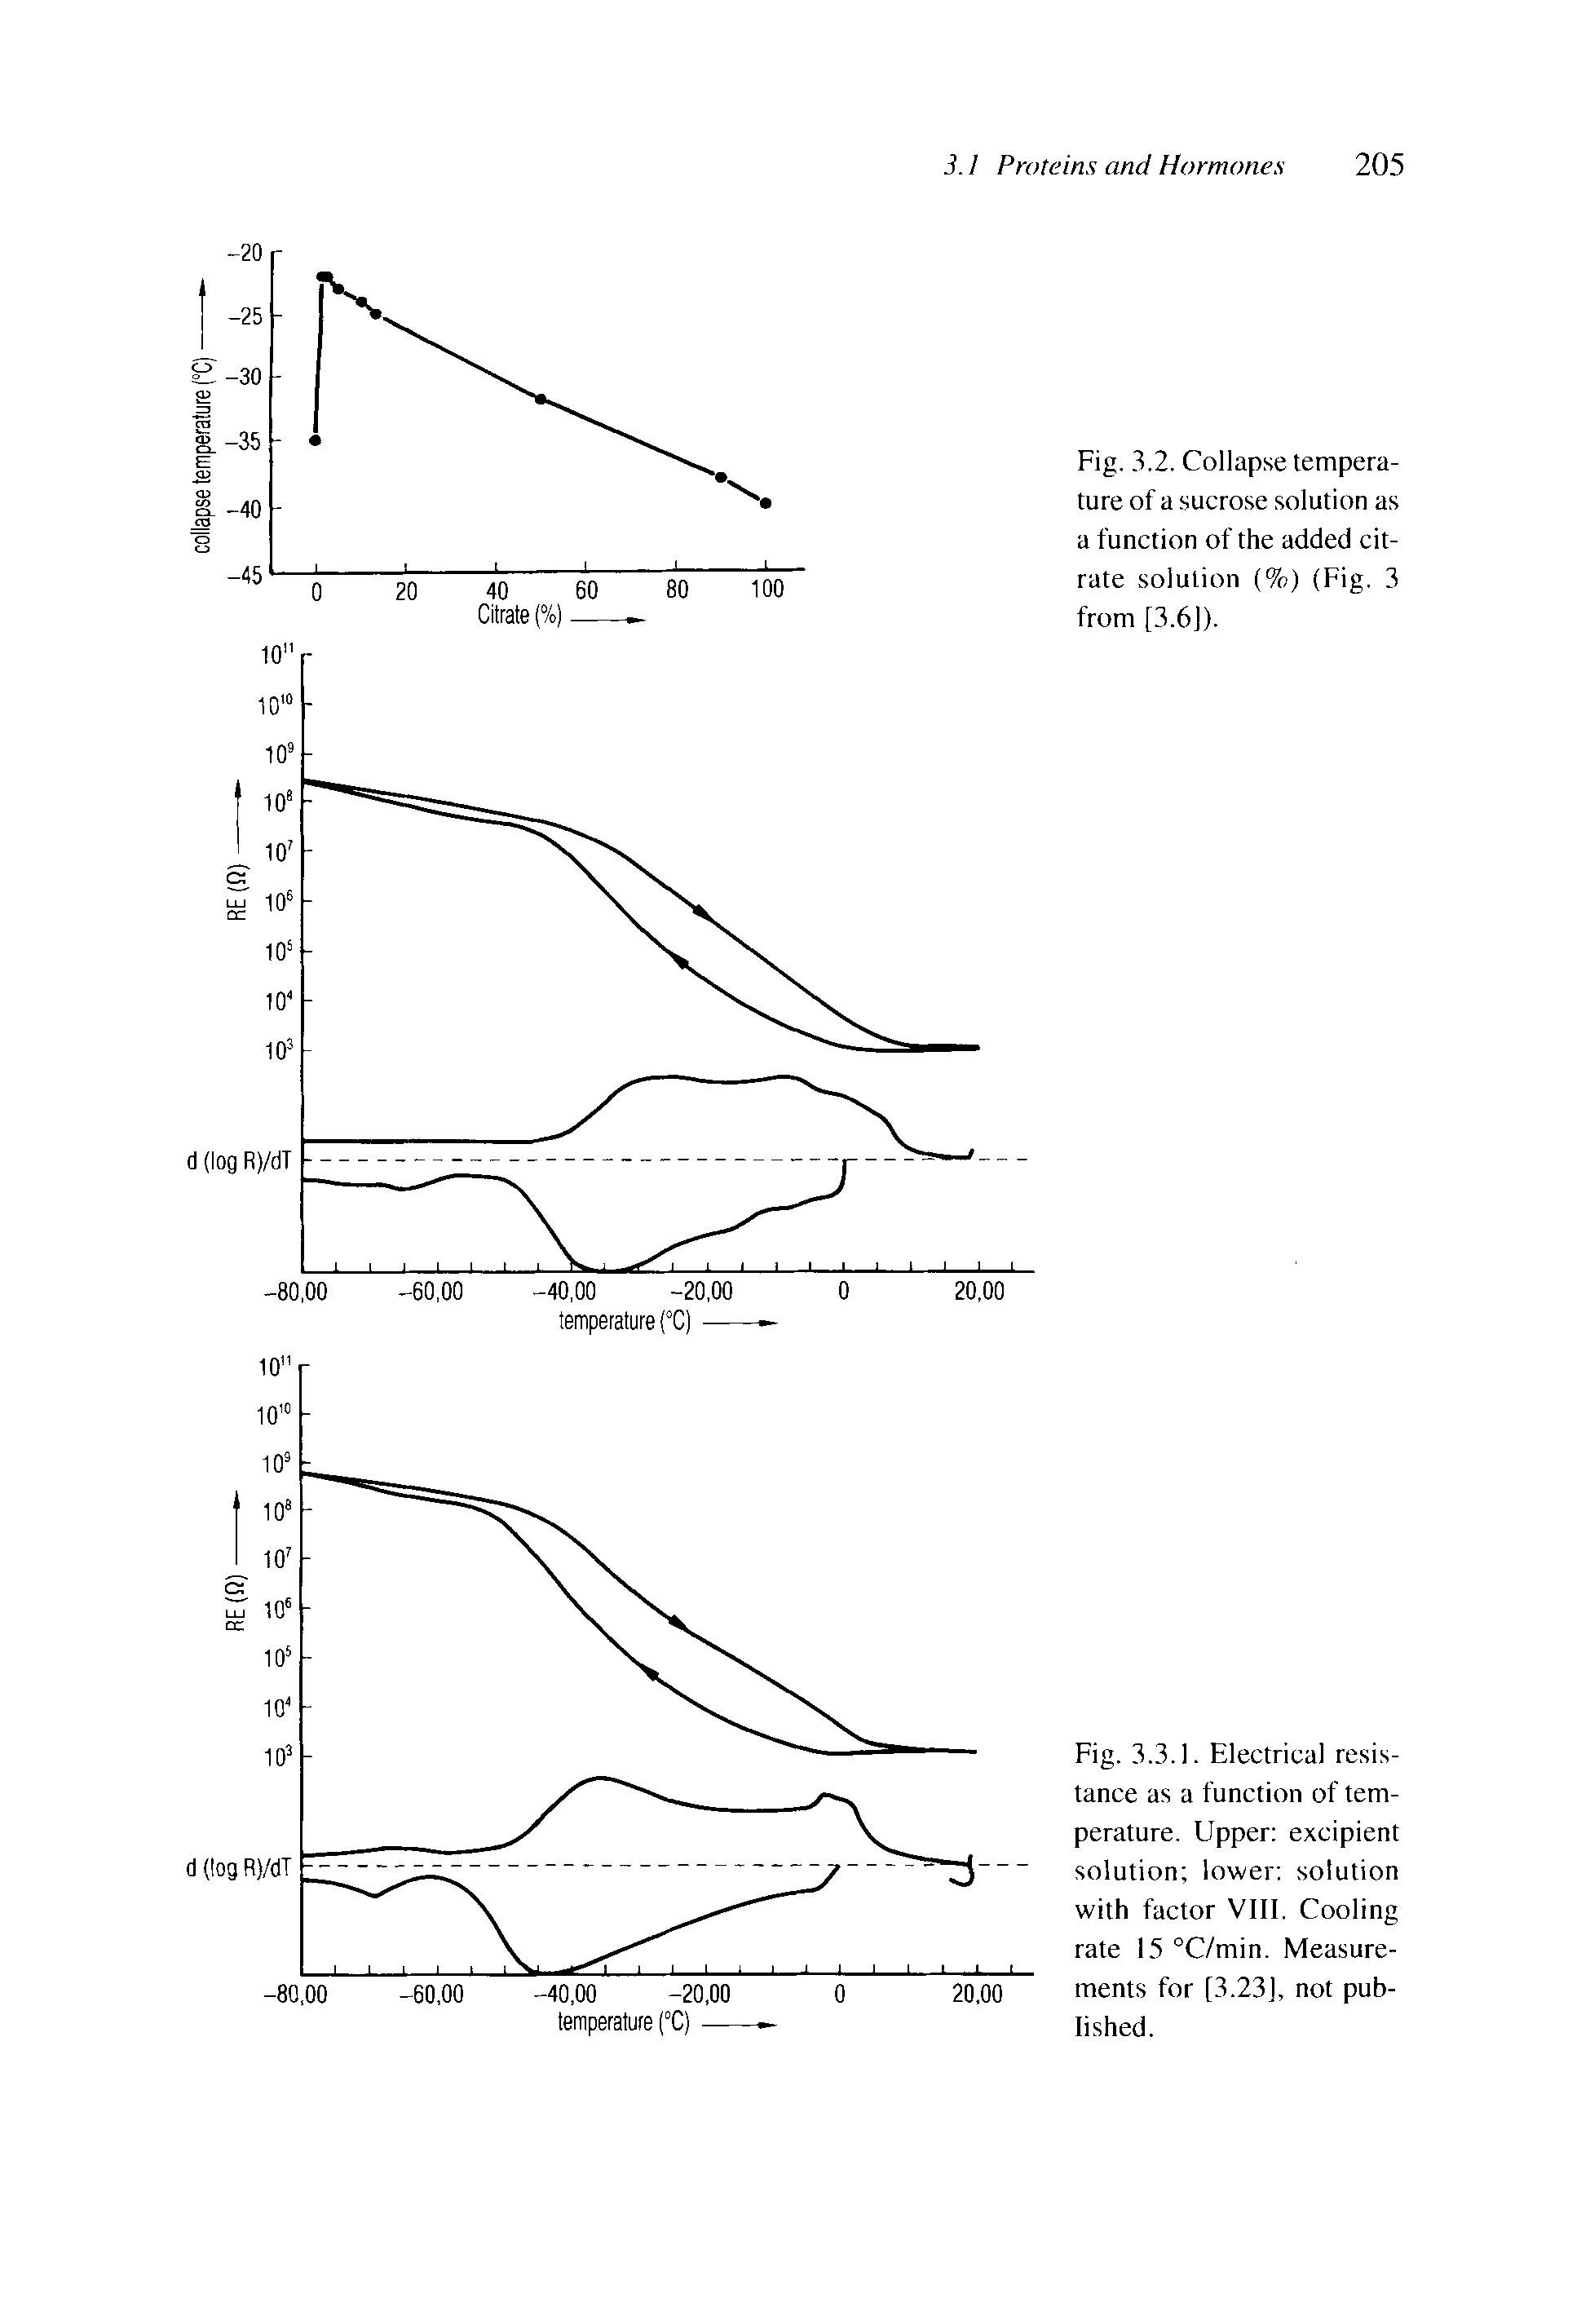 Fig. 3.2. Collapse temperature of a sucrose solution as a function of the added citrate solution (%) (Fig. 3 from [3.6]).